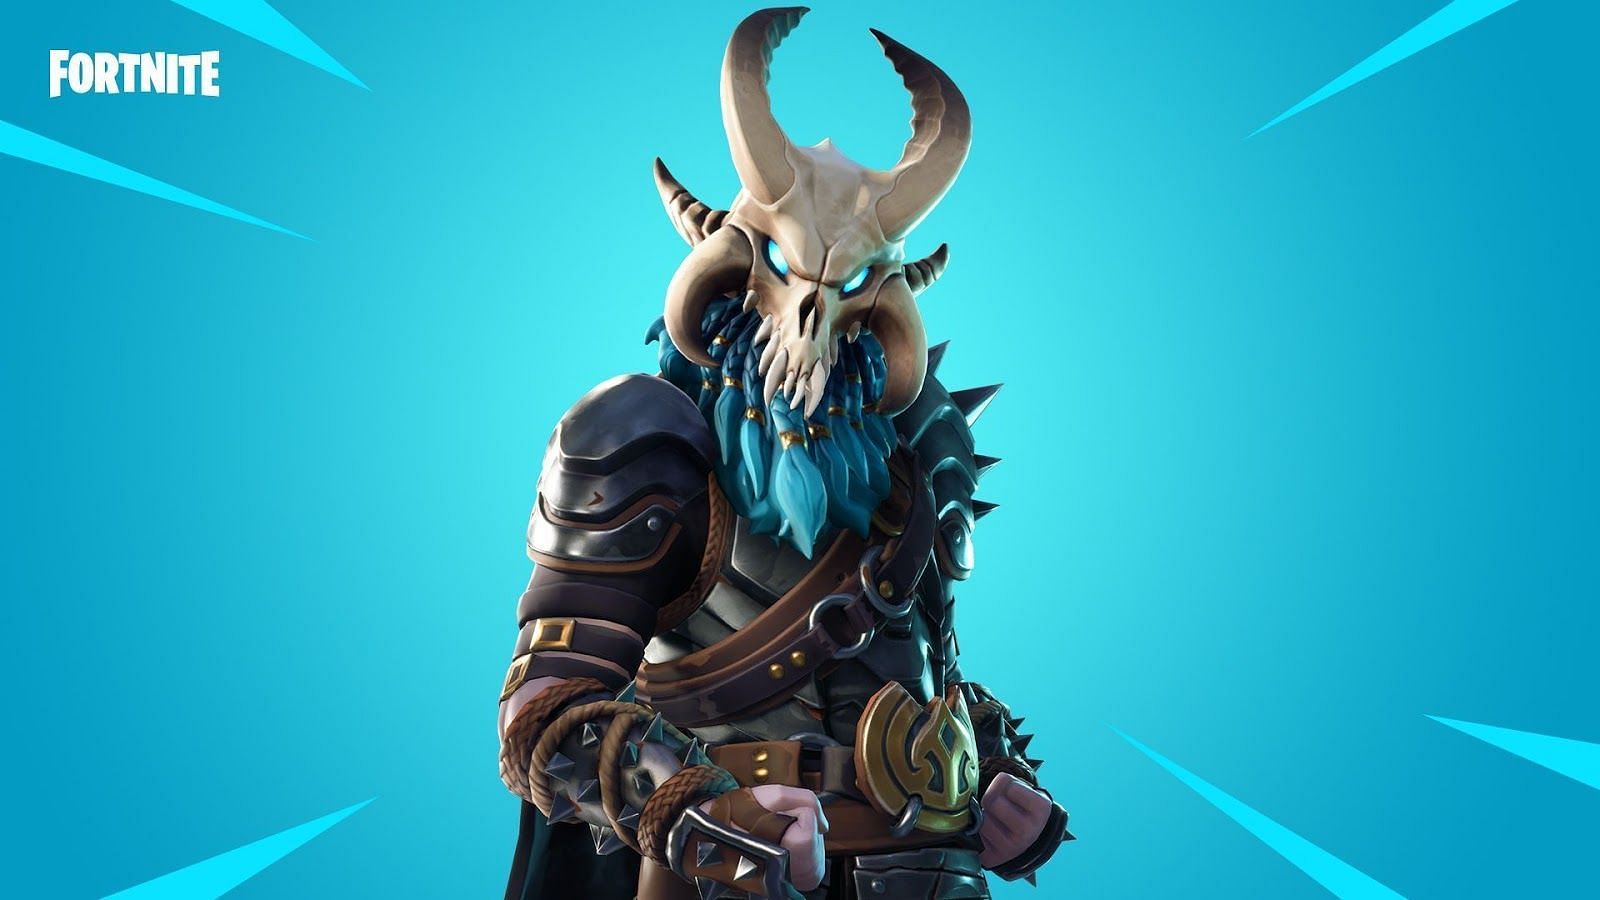 Ragnarok is one of the many Fortnite outfits inspired by urban myths and legends around the world (Image via Epic Games)